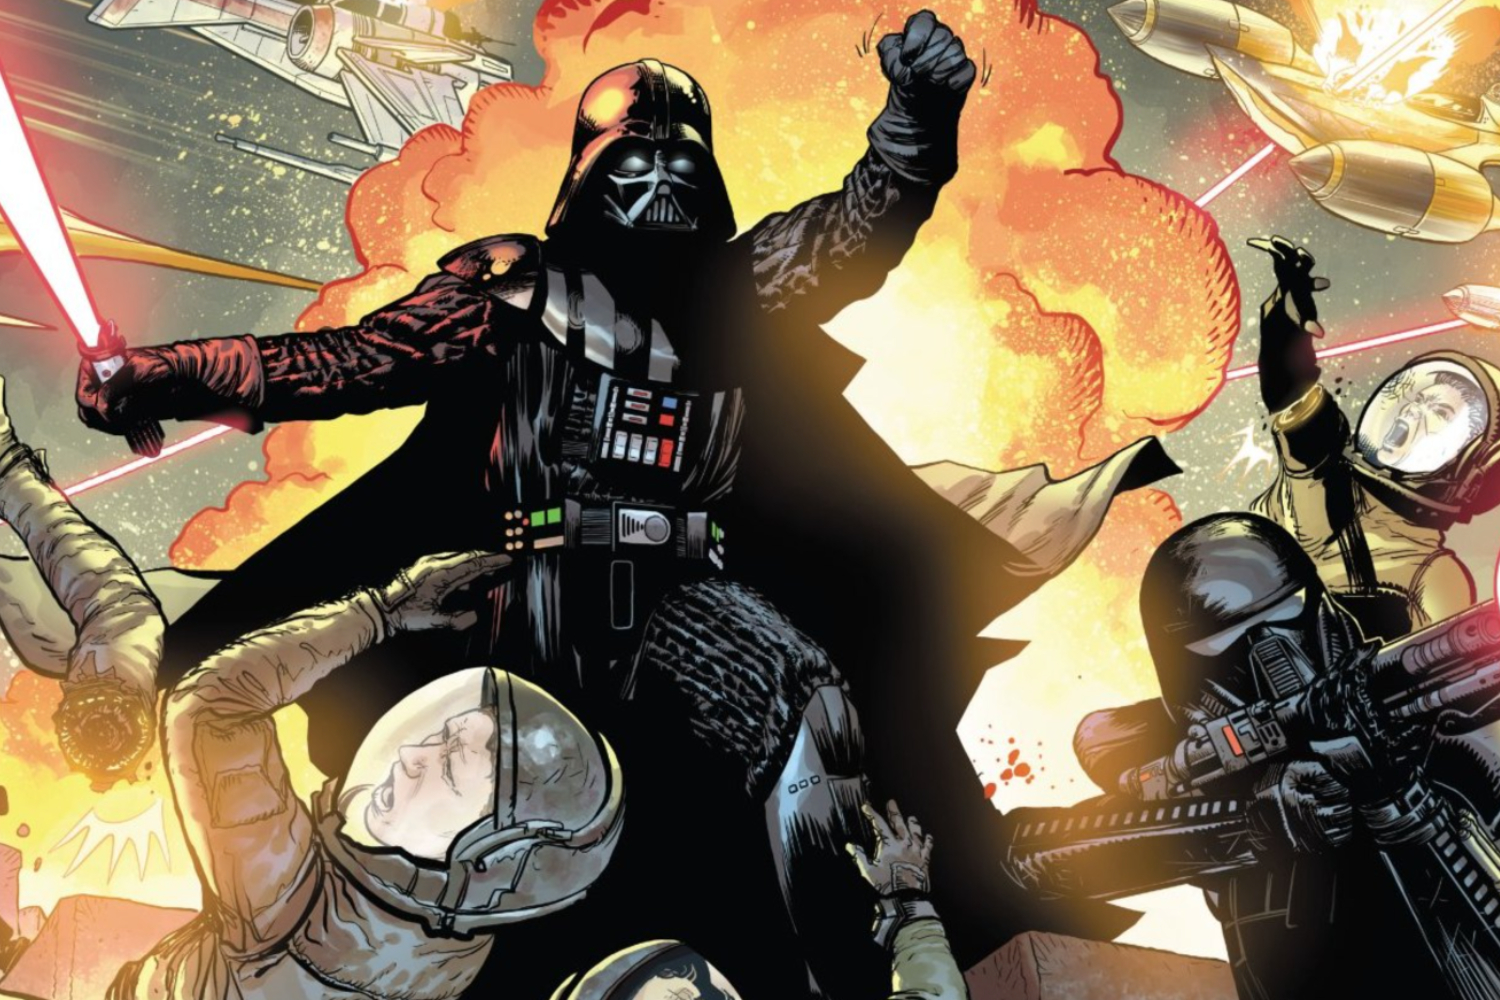 'Star Wars: Darth Vader' is a must-read for all comic book readers